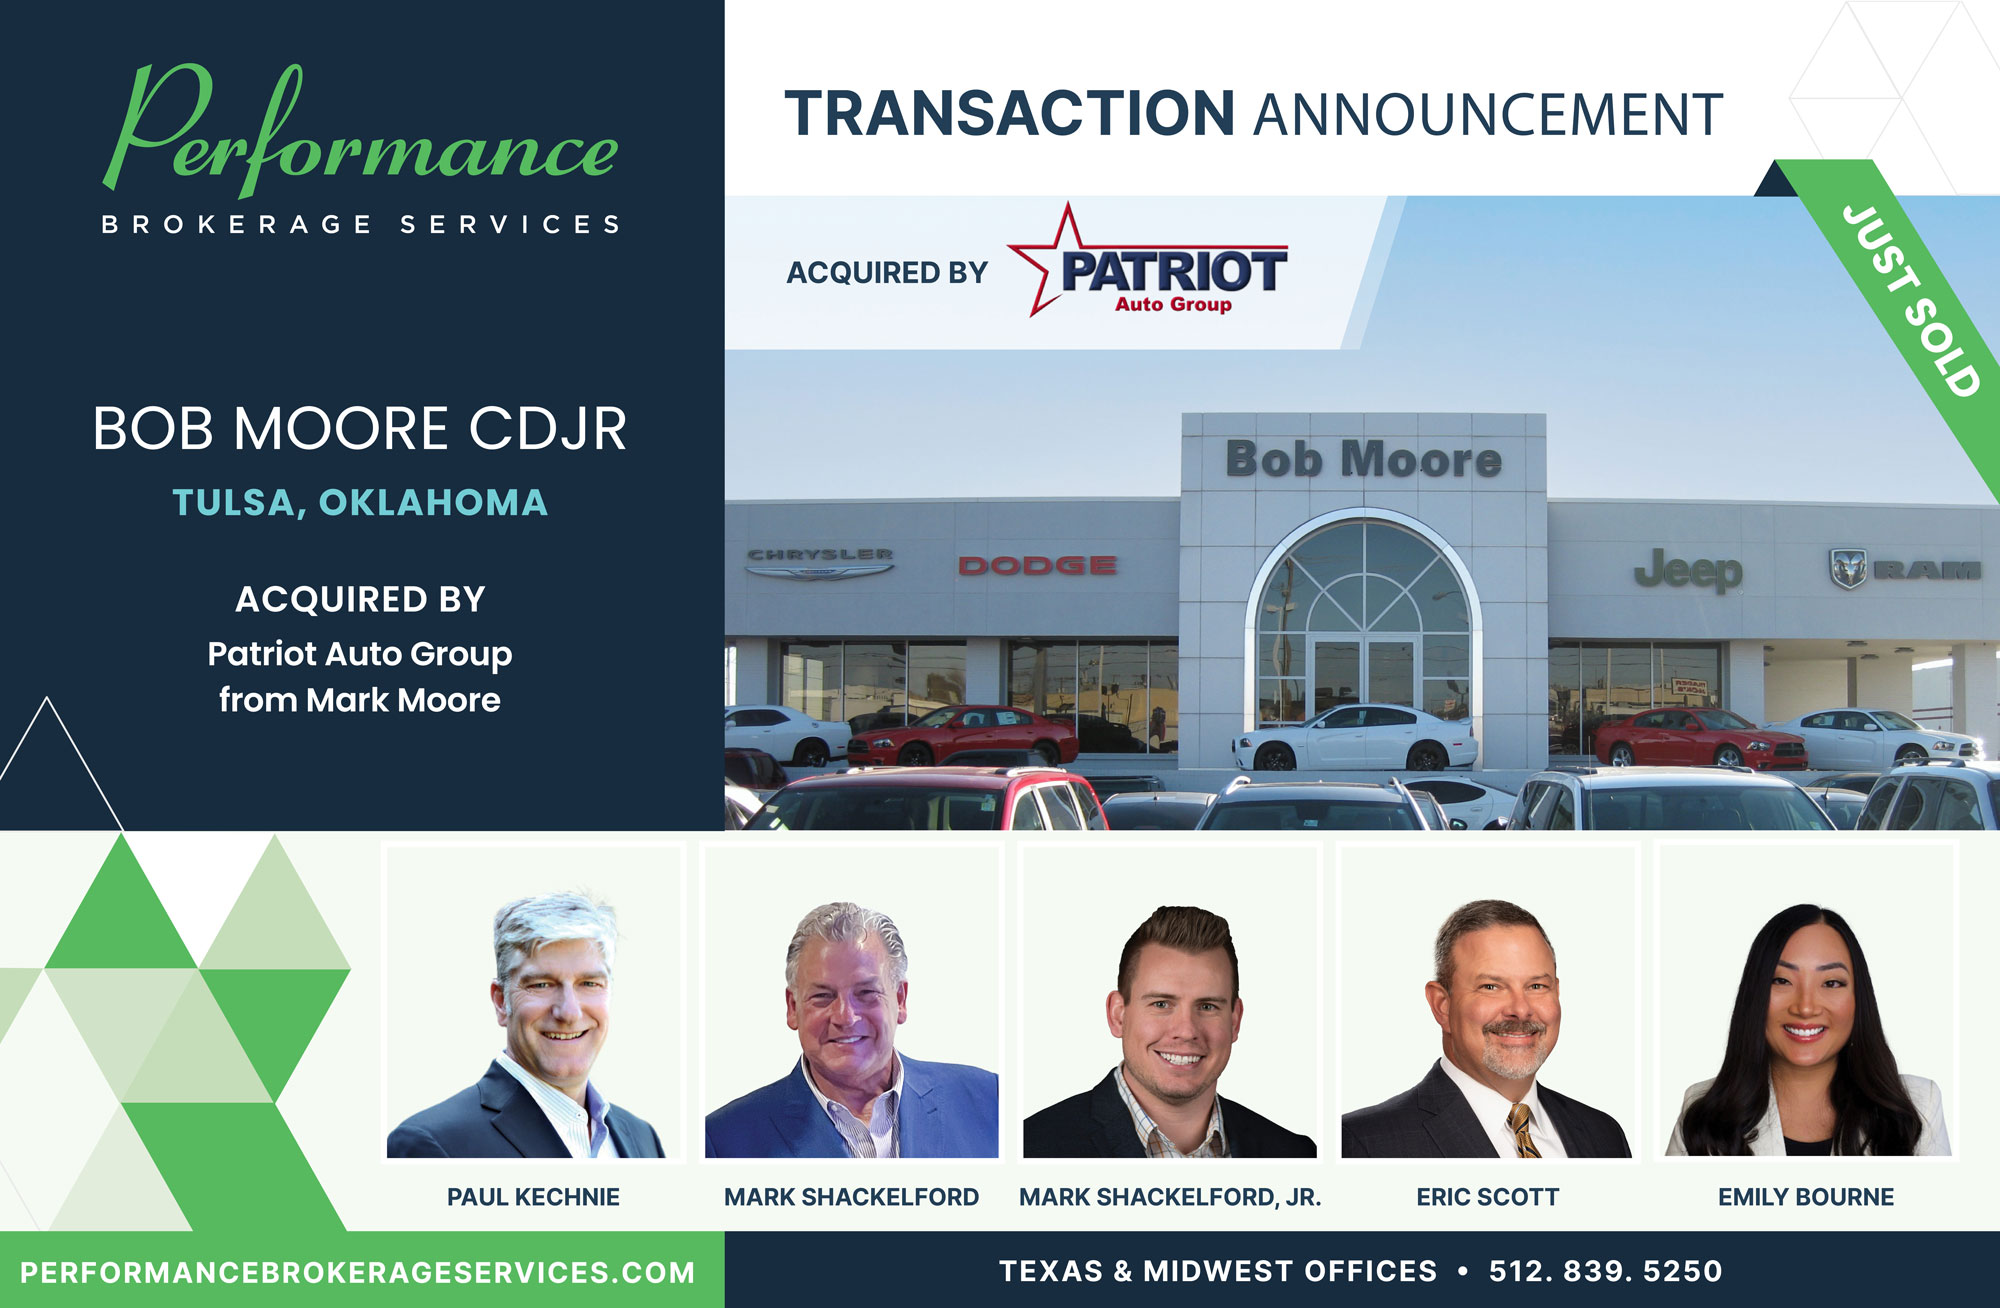 Bob Moore Chrysler Dodge Jeep Ram sells to Patriot Auto Group with Performance Brokerage